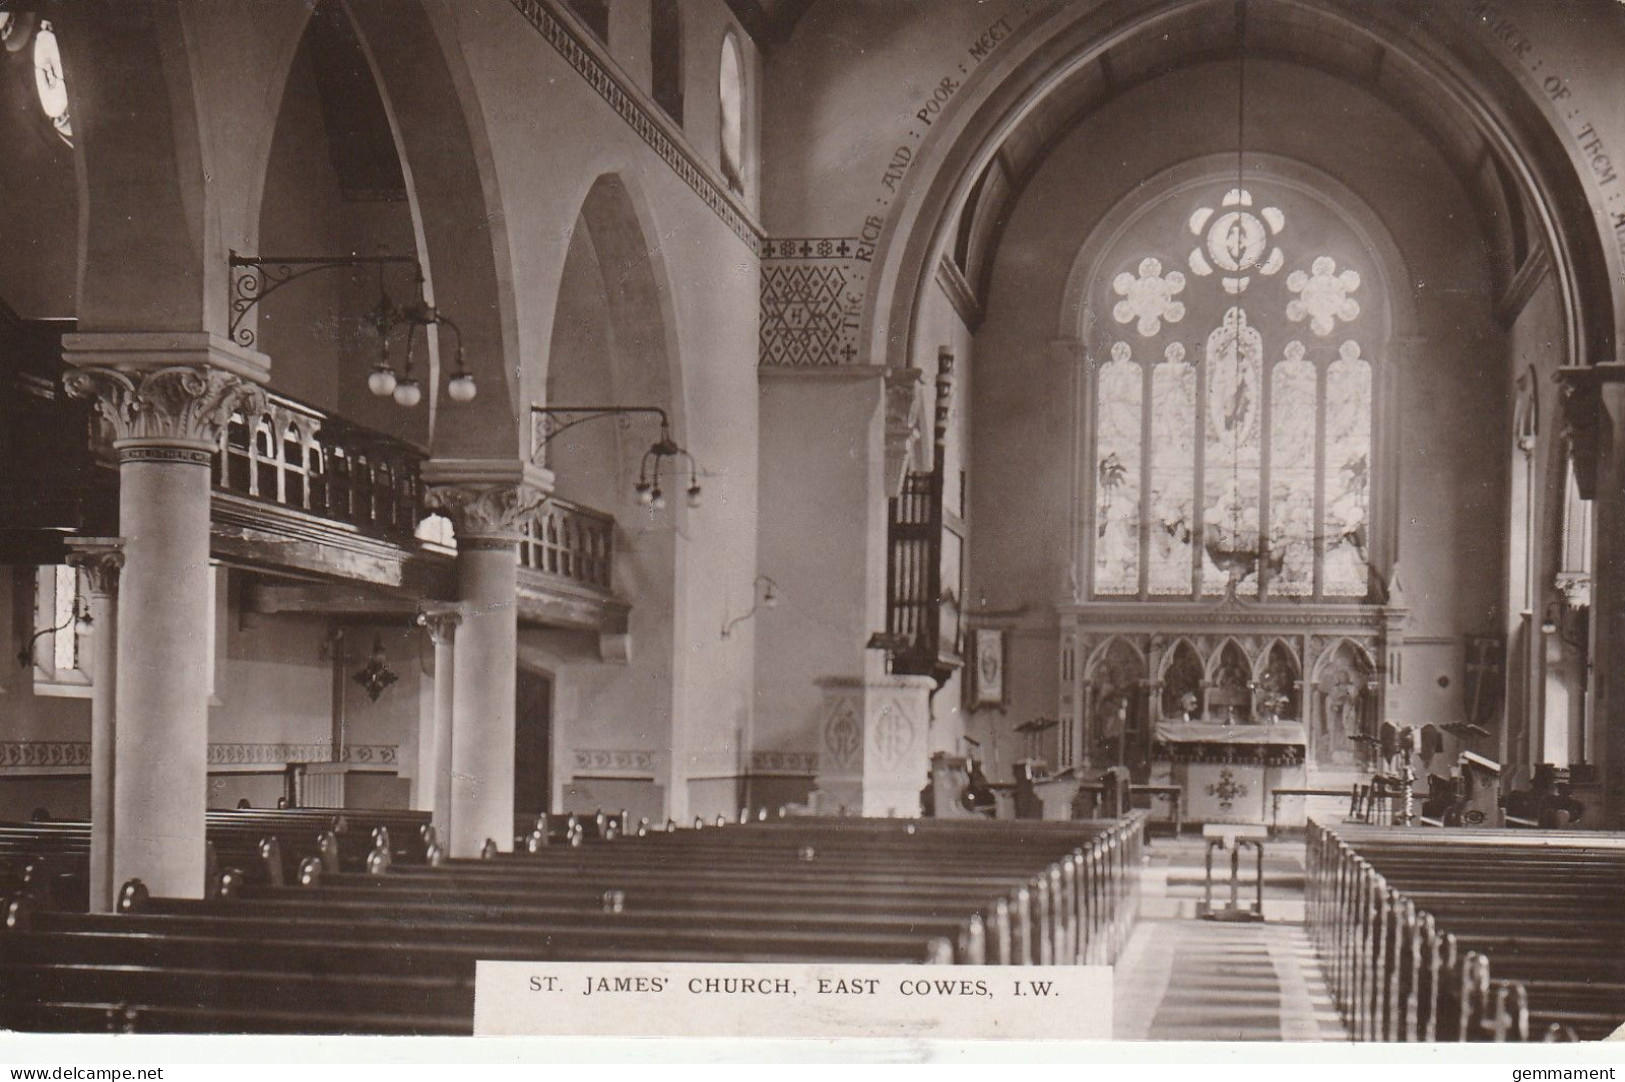 EAST COWES - ST JAMES CHURCH INTERIOR - Cowes